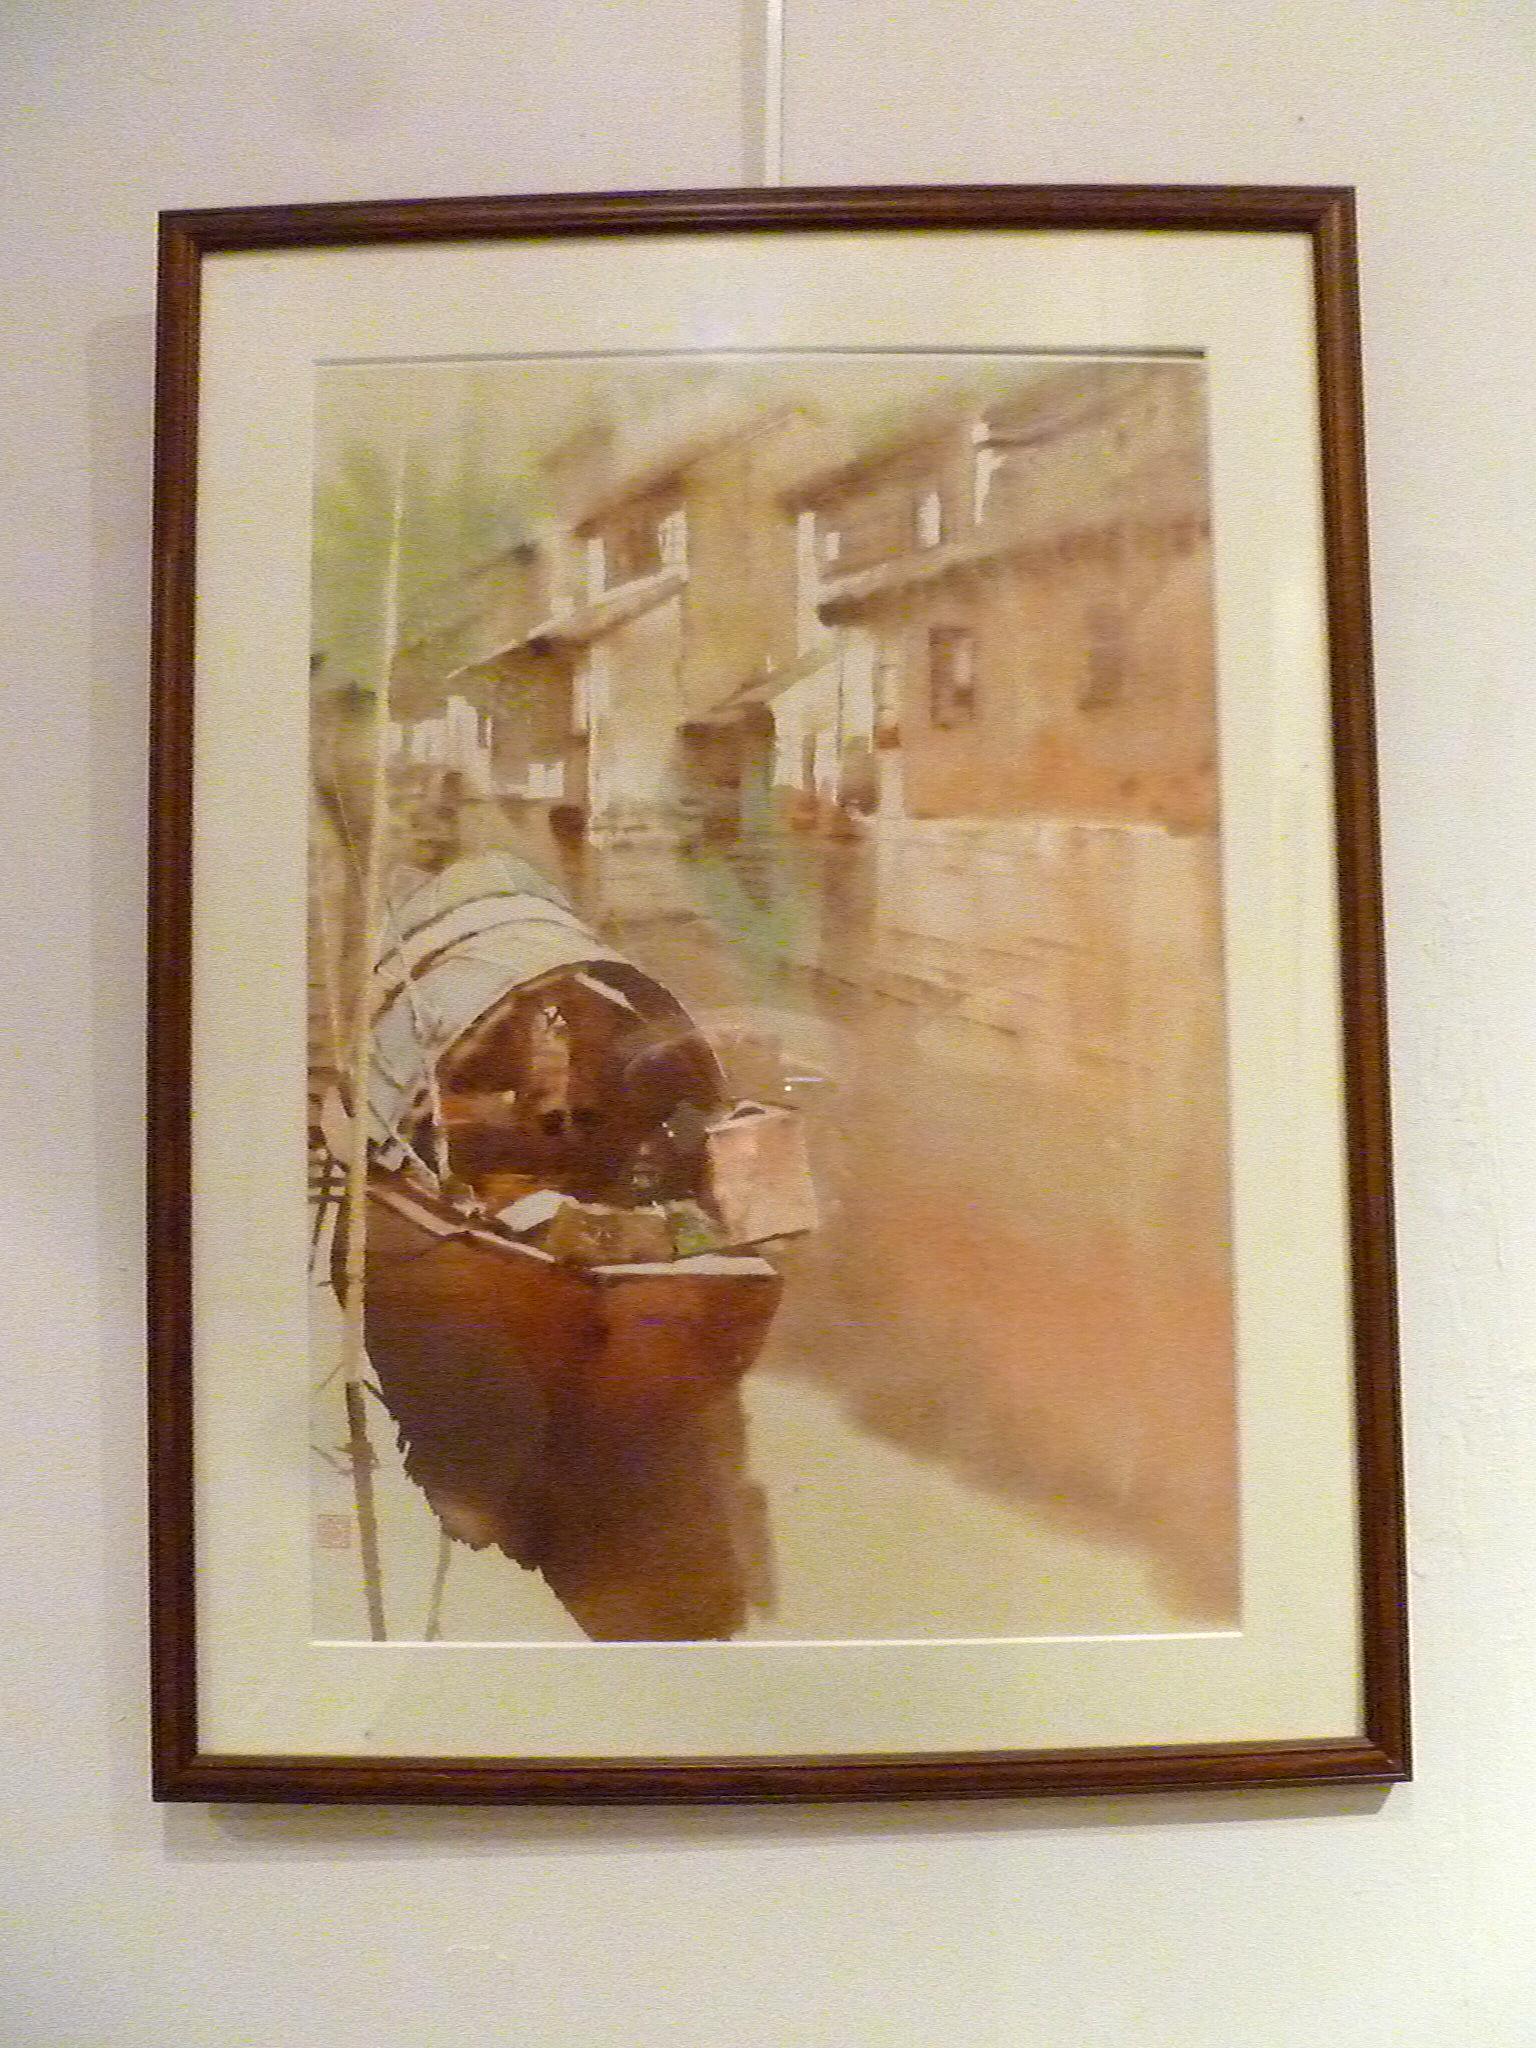 Framed Chinese water color of riverside village with boat with one artist seal.
Overall size: 19.5 width, 26